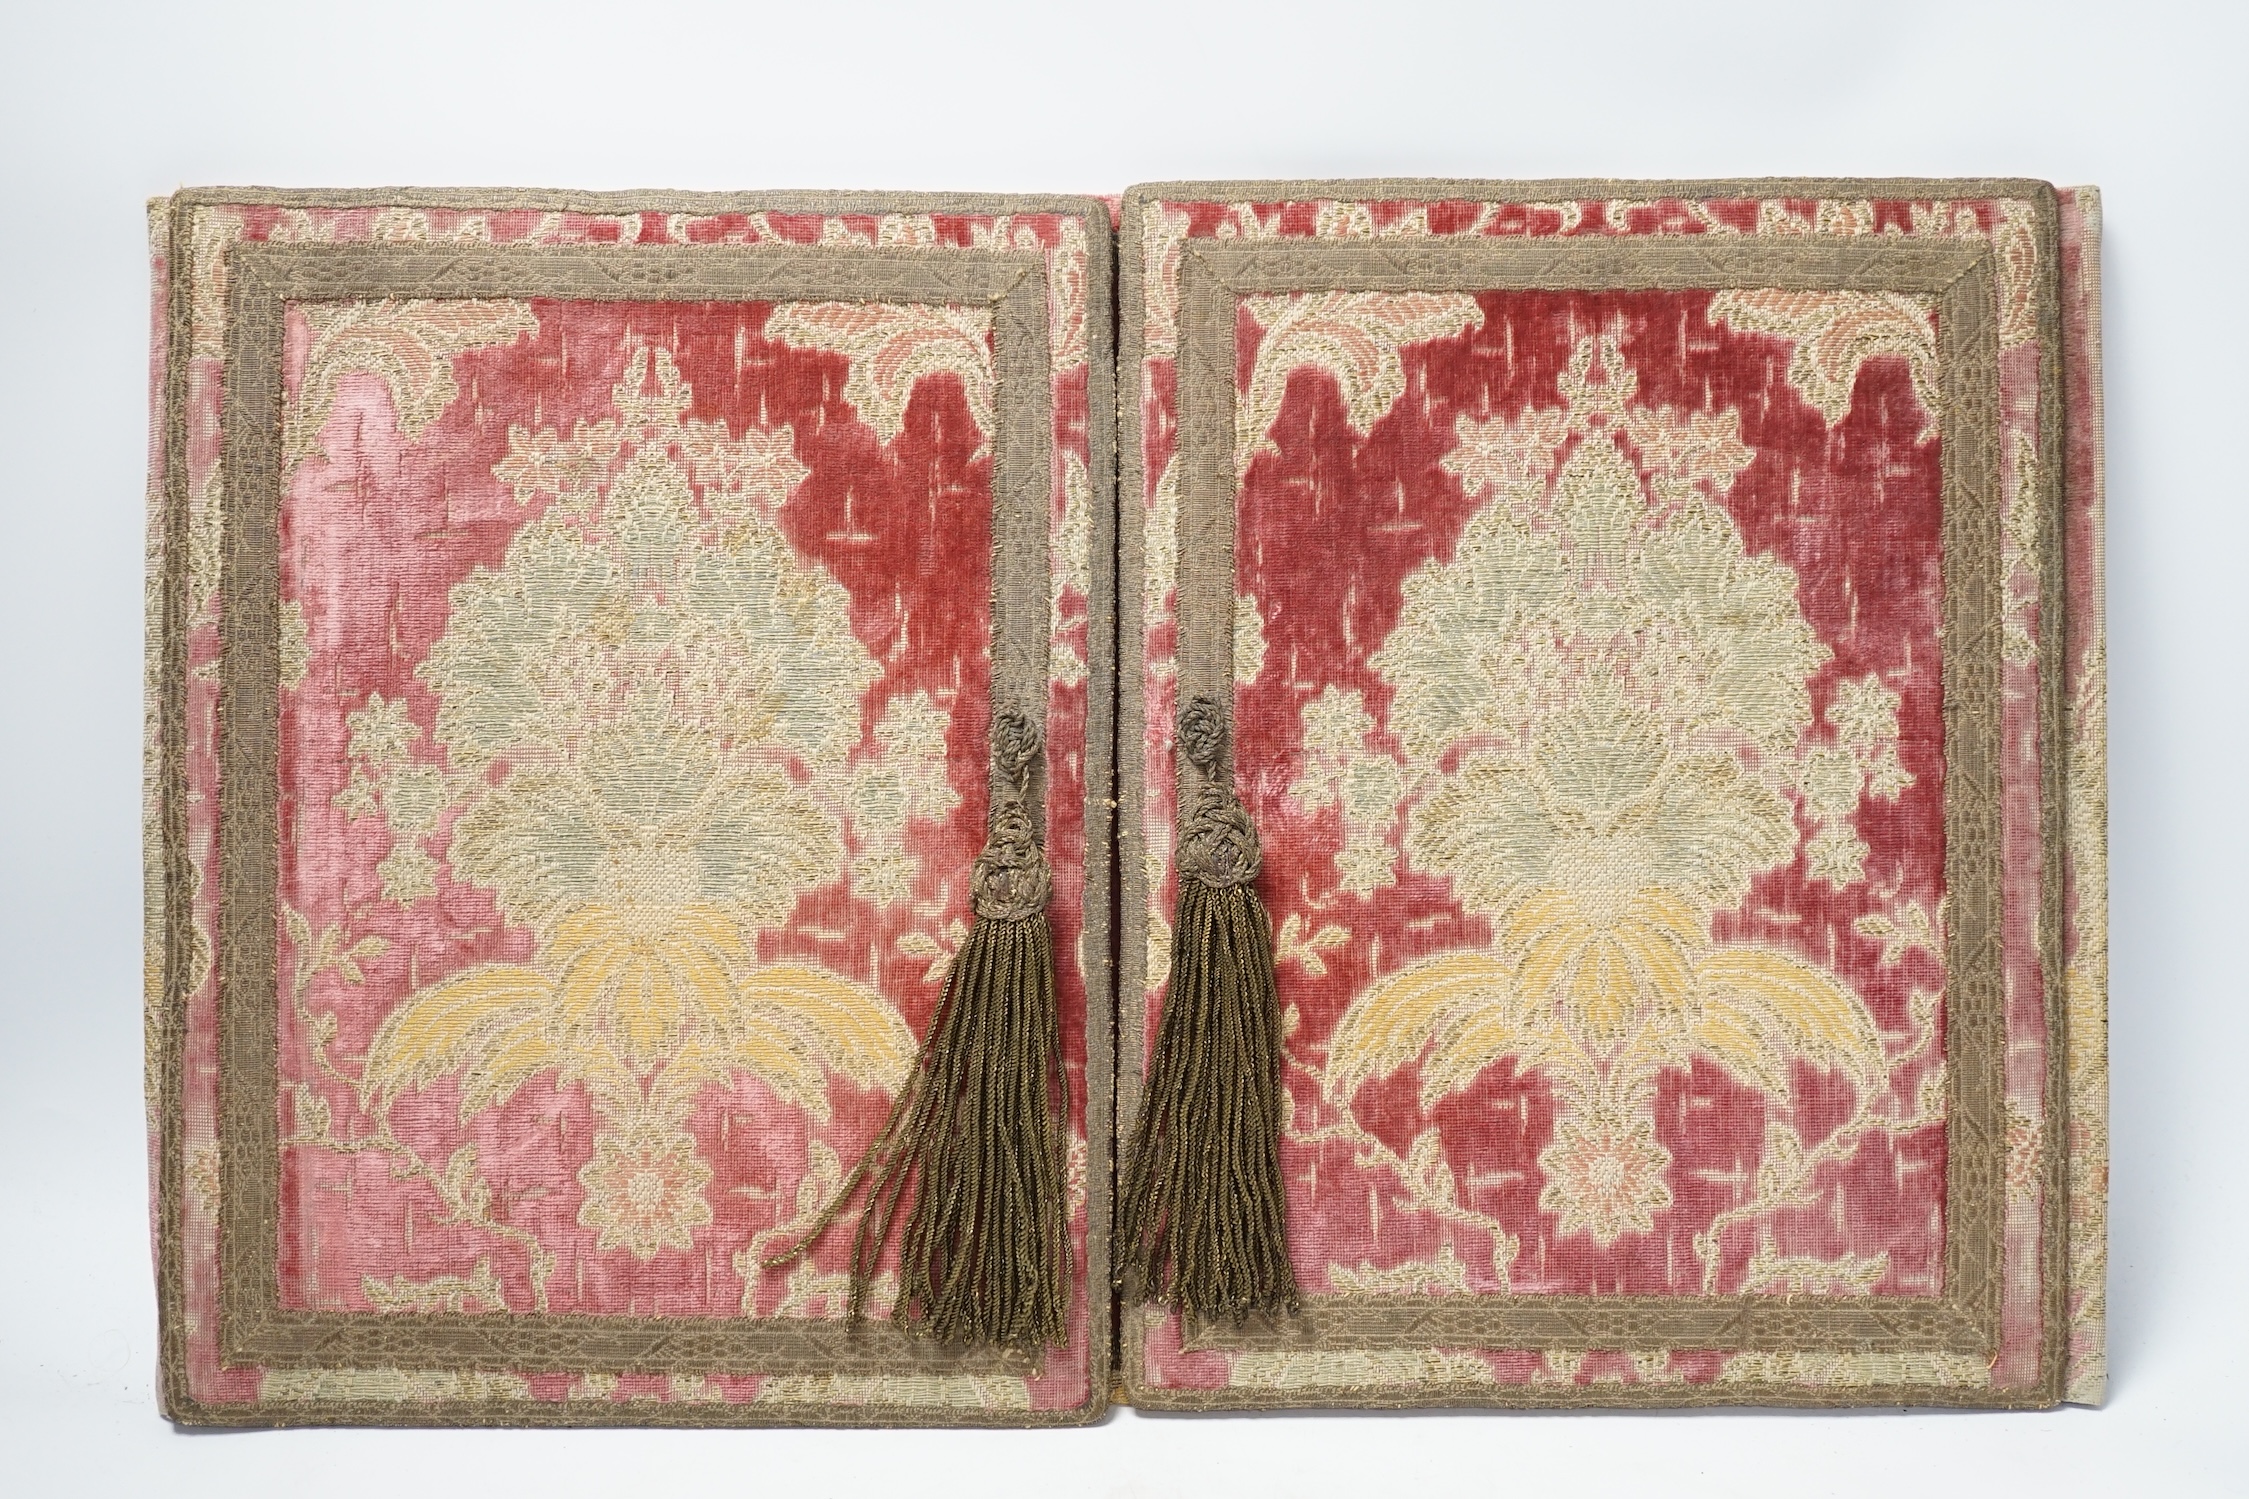 An 18th century style embroidered writing pad in damask and velvet, 32 x 51cm. Condition - poor to fair, generally faded